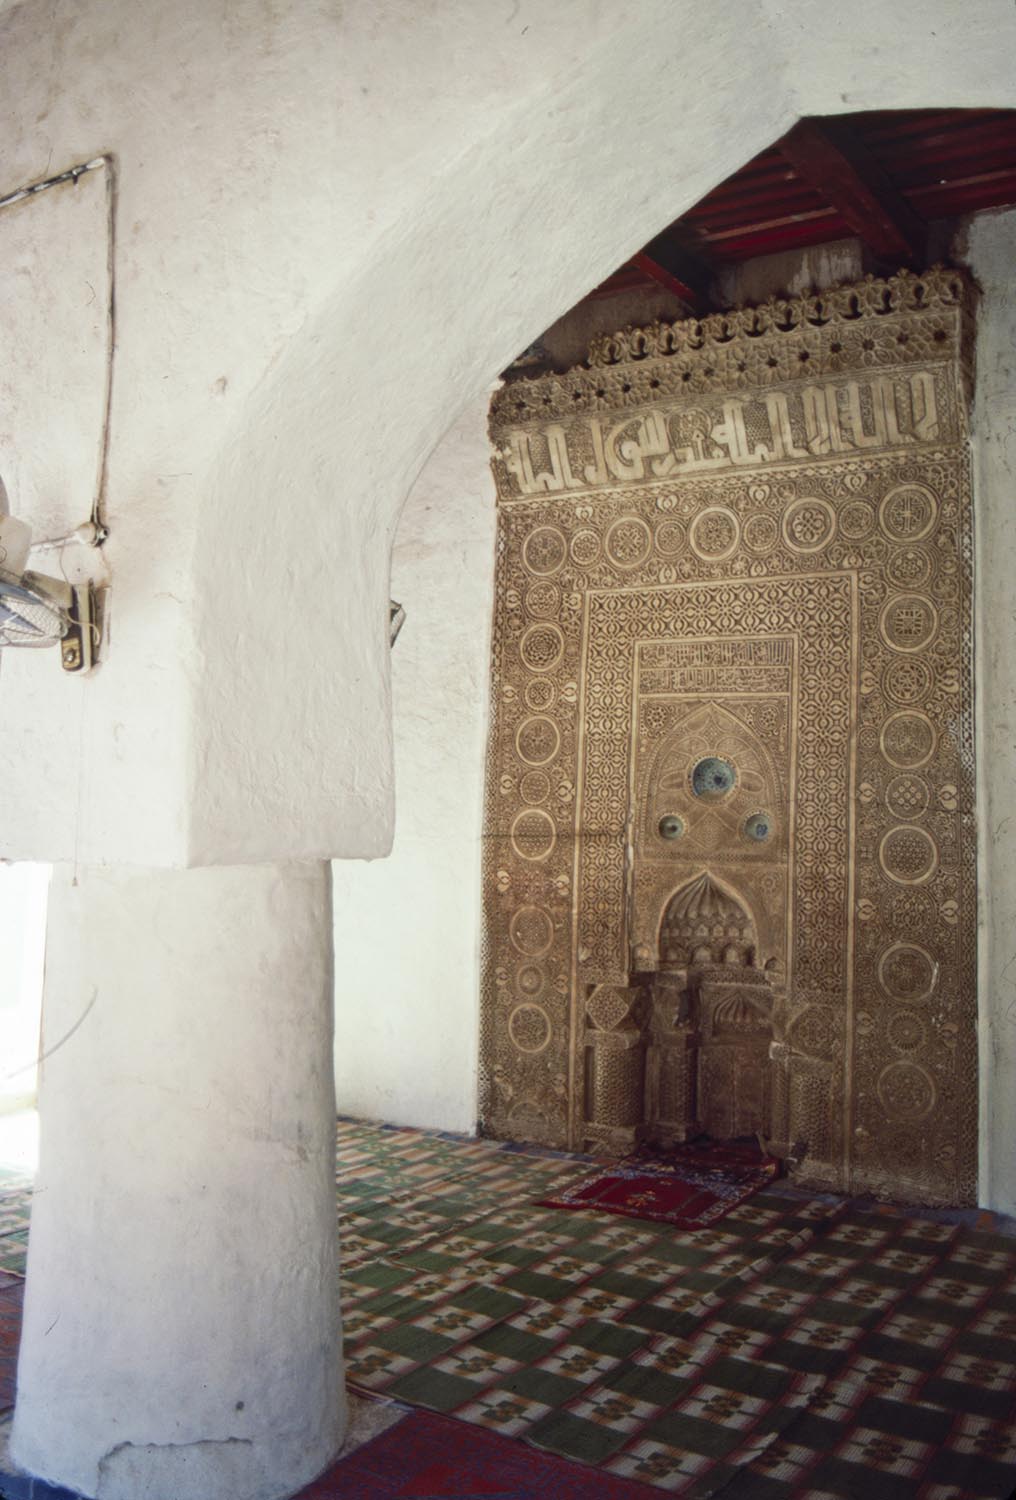 View of mihrab.